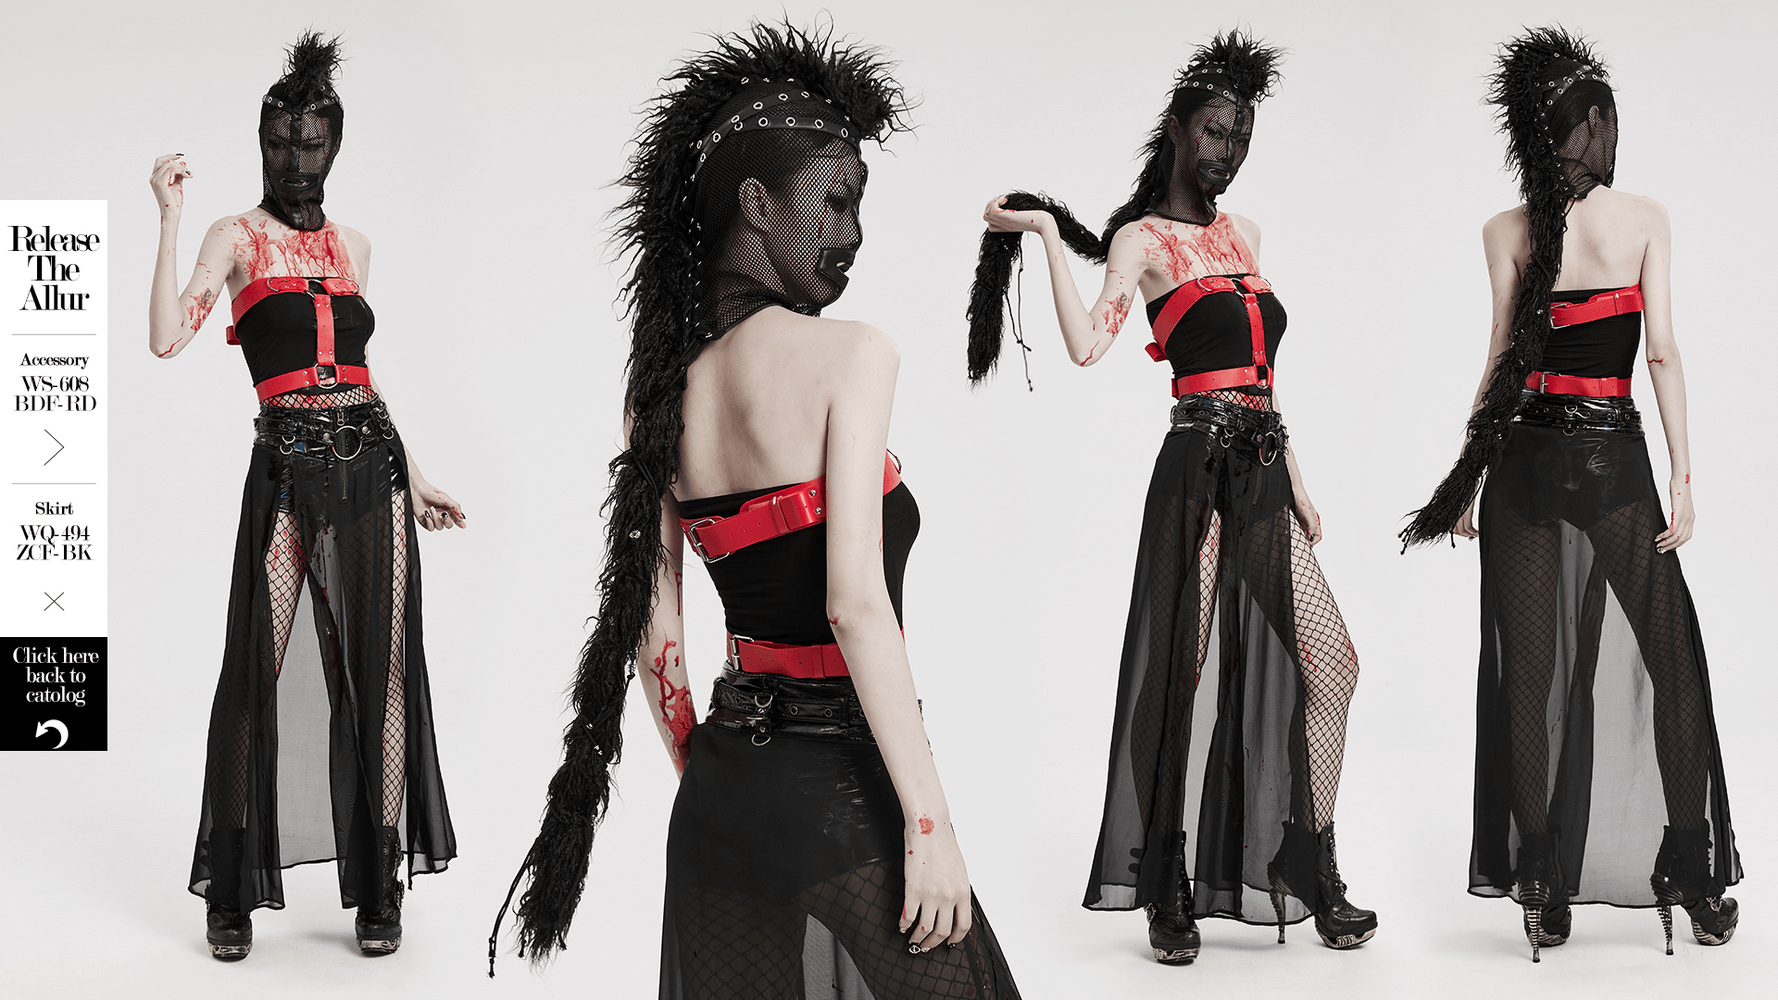 Edgy Black Mesh Hood with Mohawk Ponytail in Punk Style